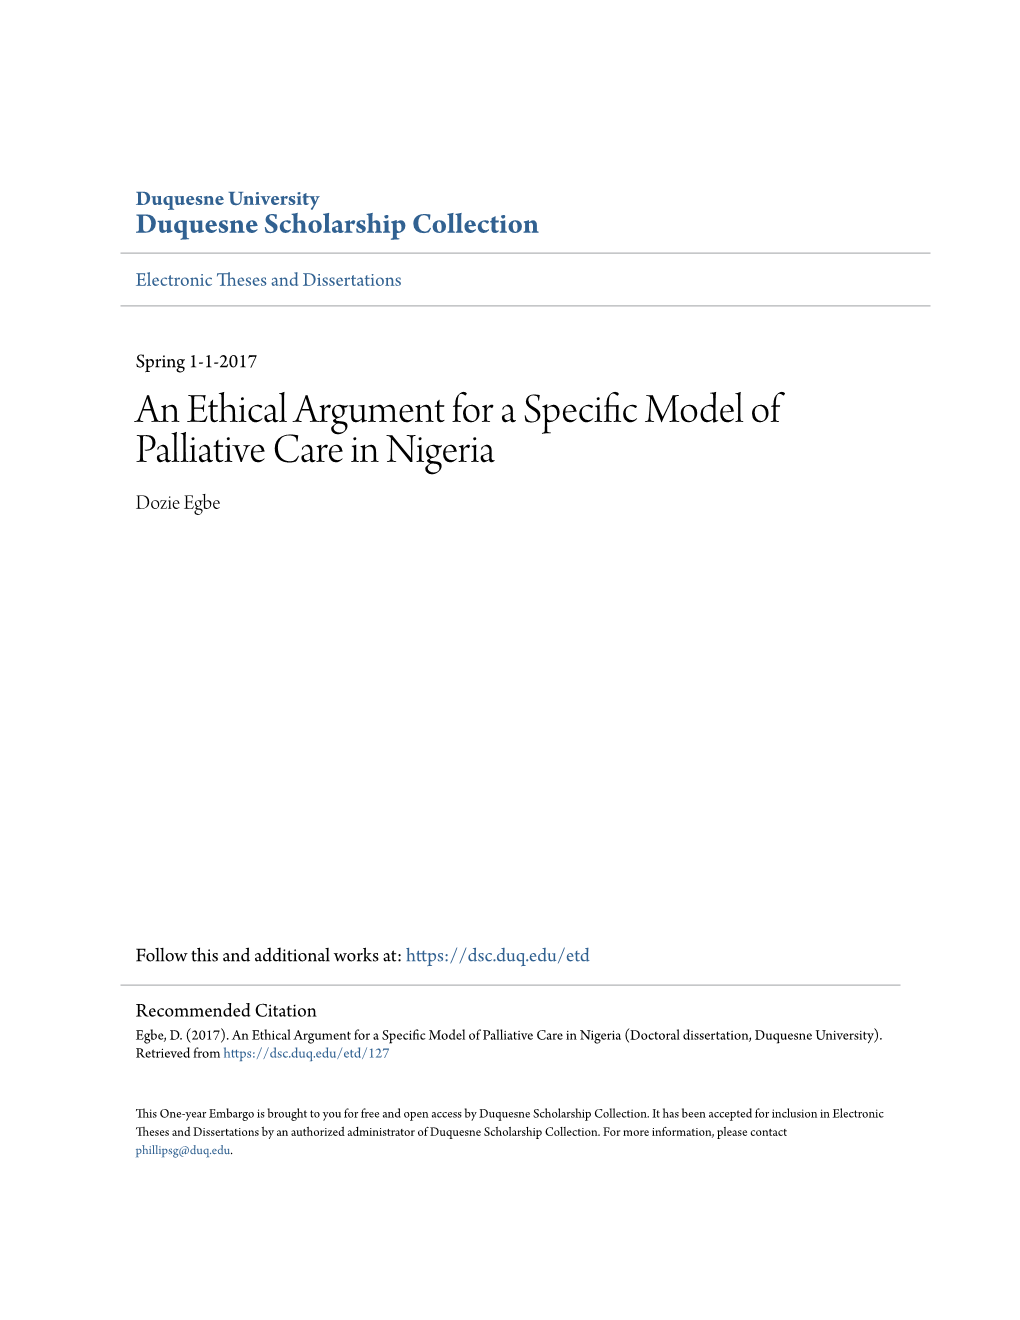 An Ethical Argument for a Specific Model of Palliative Care in Nigeria